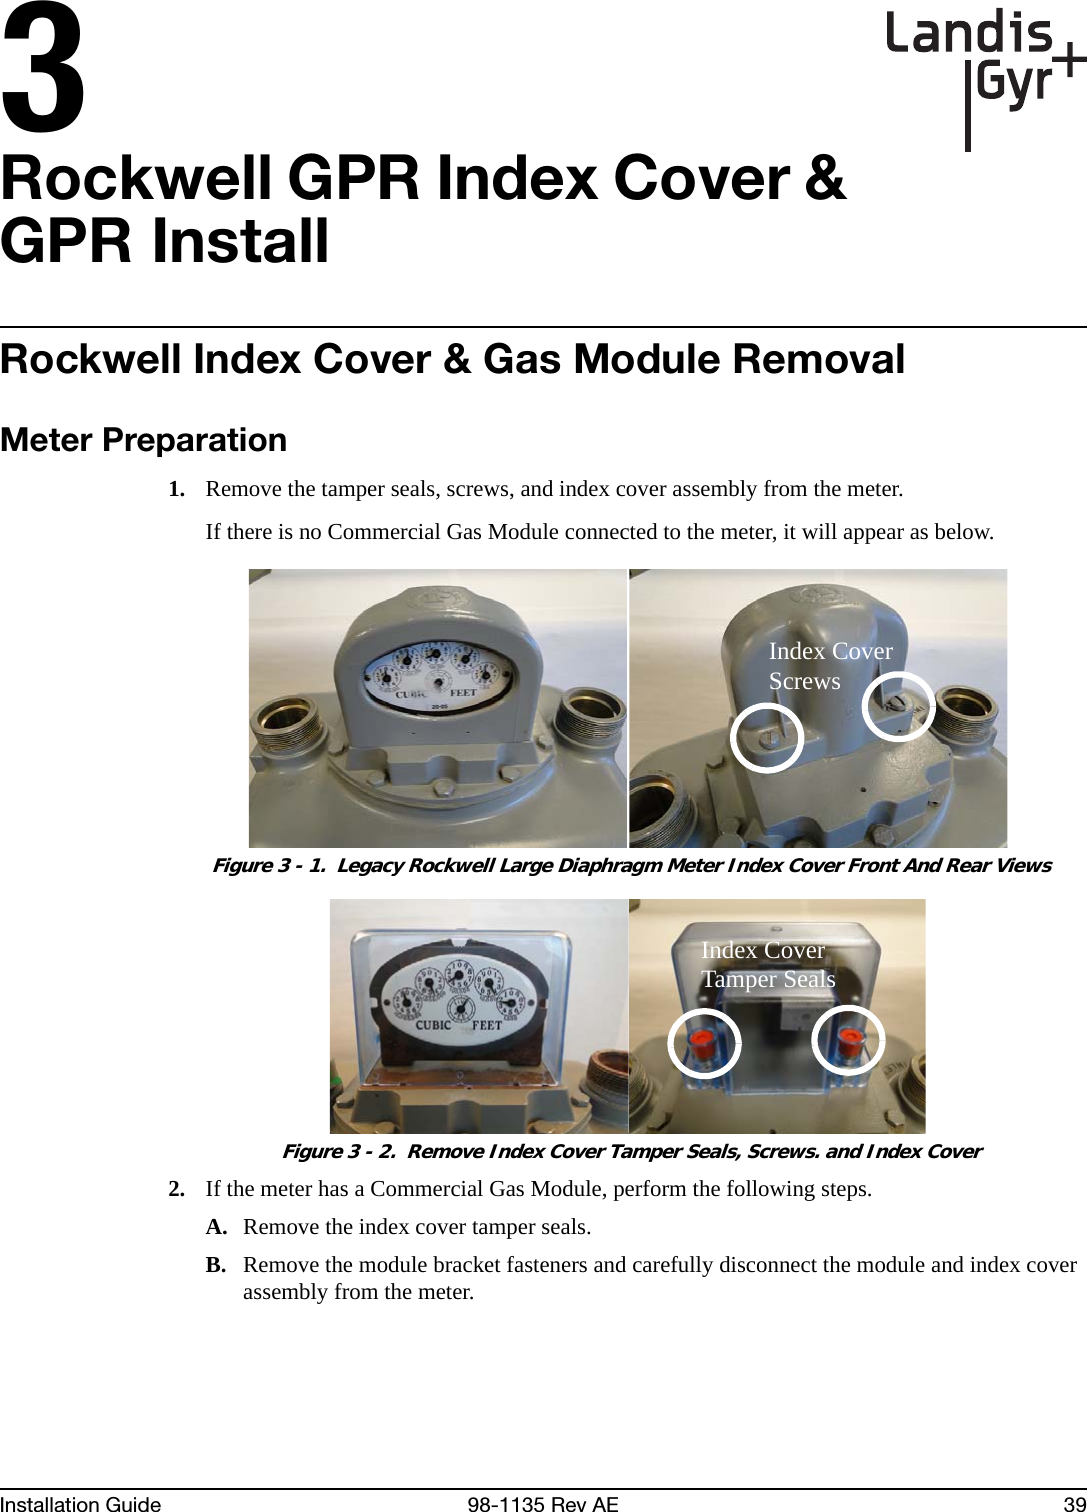 3Installation Guide 98-1135 Rev AE 39Rockwell GPR Index Cover &amp; GPR InstallRockwell Index Cover &amp; Gas Module RemovalMeter Preparation1. Remove the tamper seals, screws, and index cover assembly from the meter.If there is no Commercial Gas Module connected to the meter, it will appear as below. Figure 3 - 1.  Legacy Rockwell Large Diaphragm Meter Index Cover Front And Rear Views Figure 3 - 2.  Remove Index Cover Tamper Seals, Screws. and Index Cover2. If the meter has a Commercial Gas Module, perform the following steps.A. Remove the index cover tamper seals.B. Remove the module bracket fasteners and carefully disconnect the module and index cover assembly from the meter.Index Cover ScrewsIndex Cover Tamper Seals